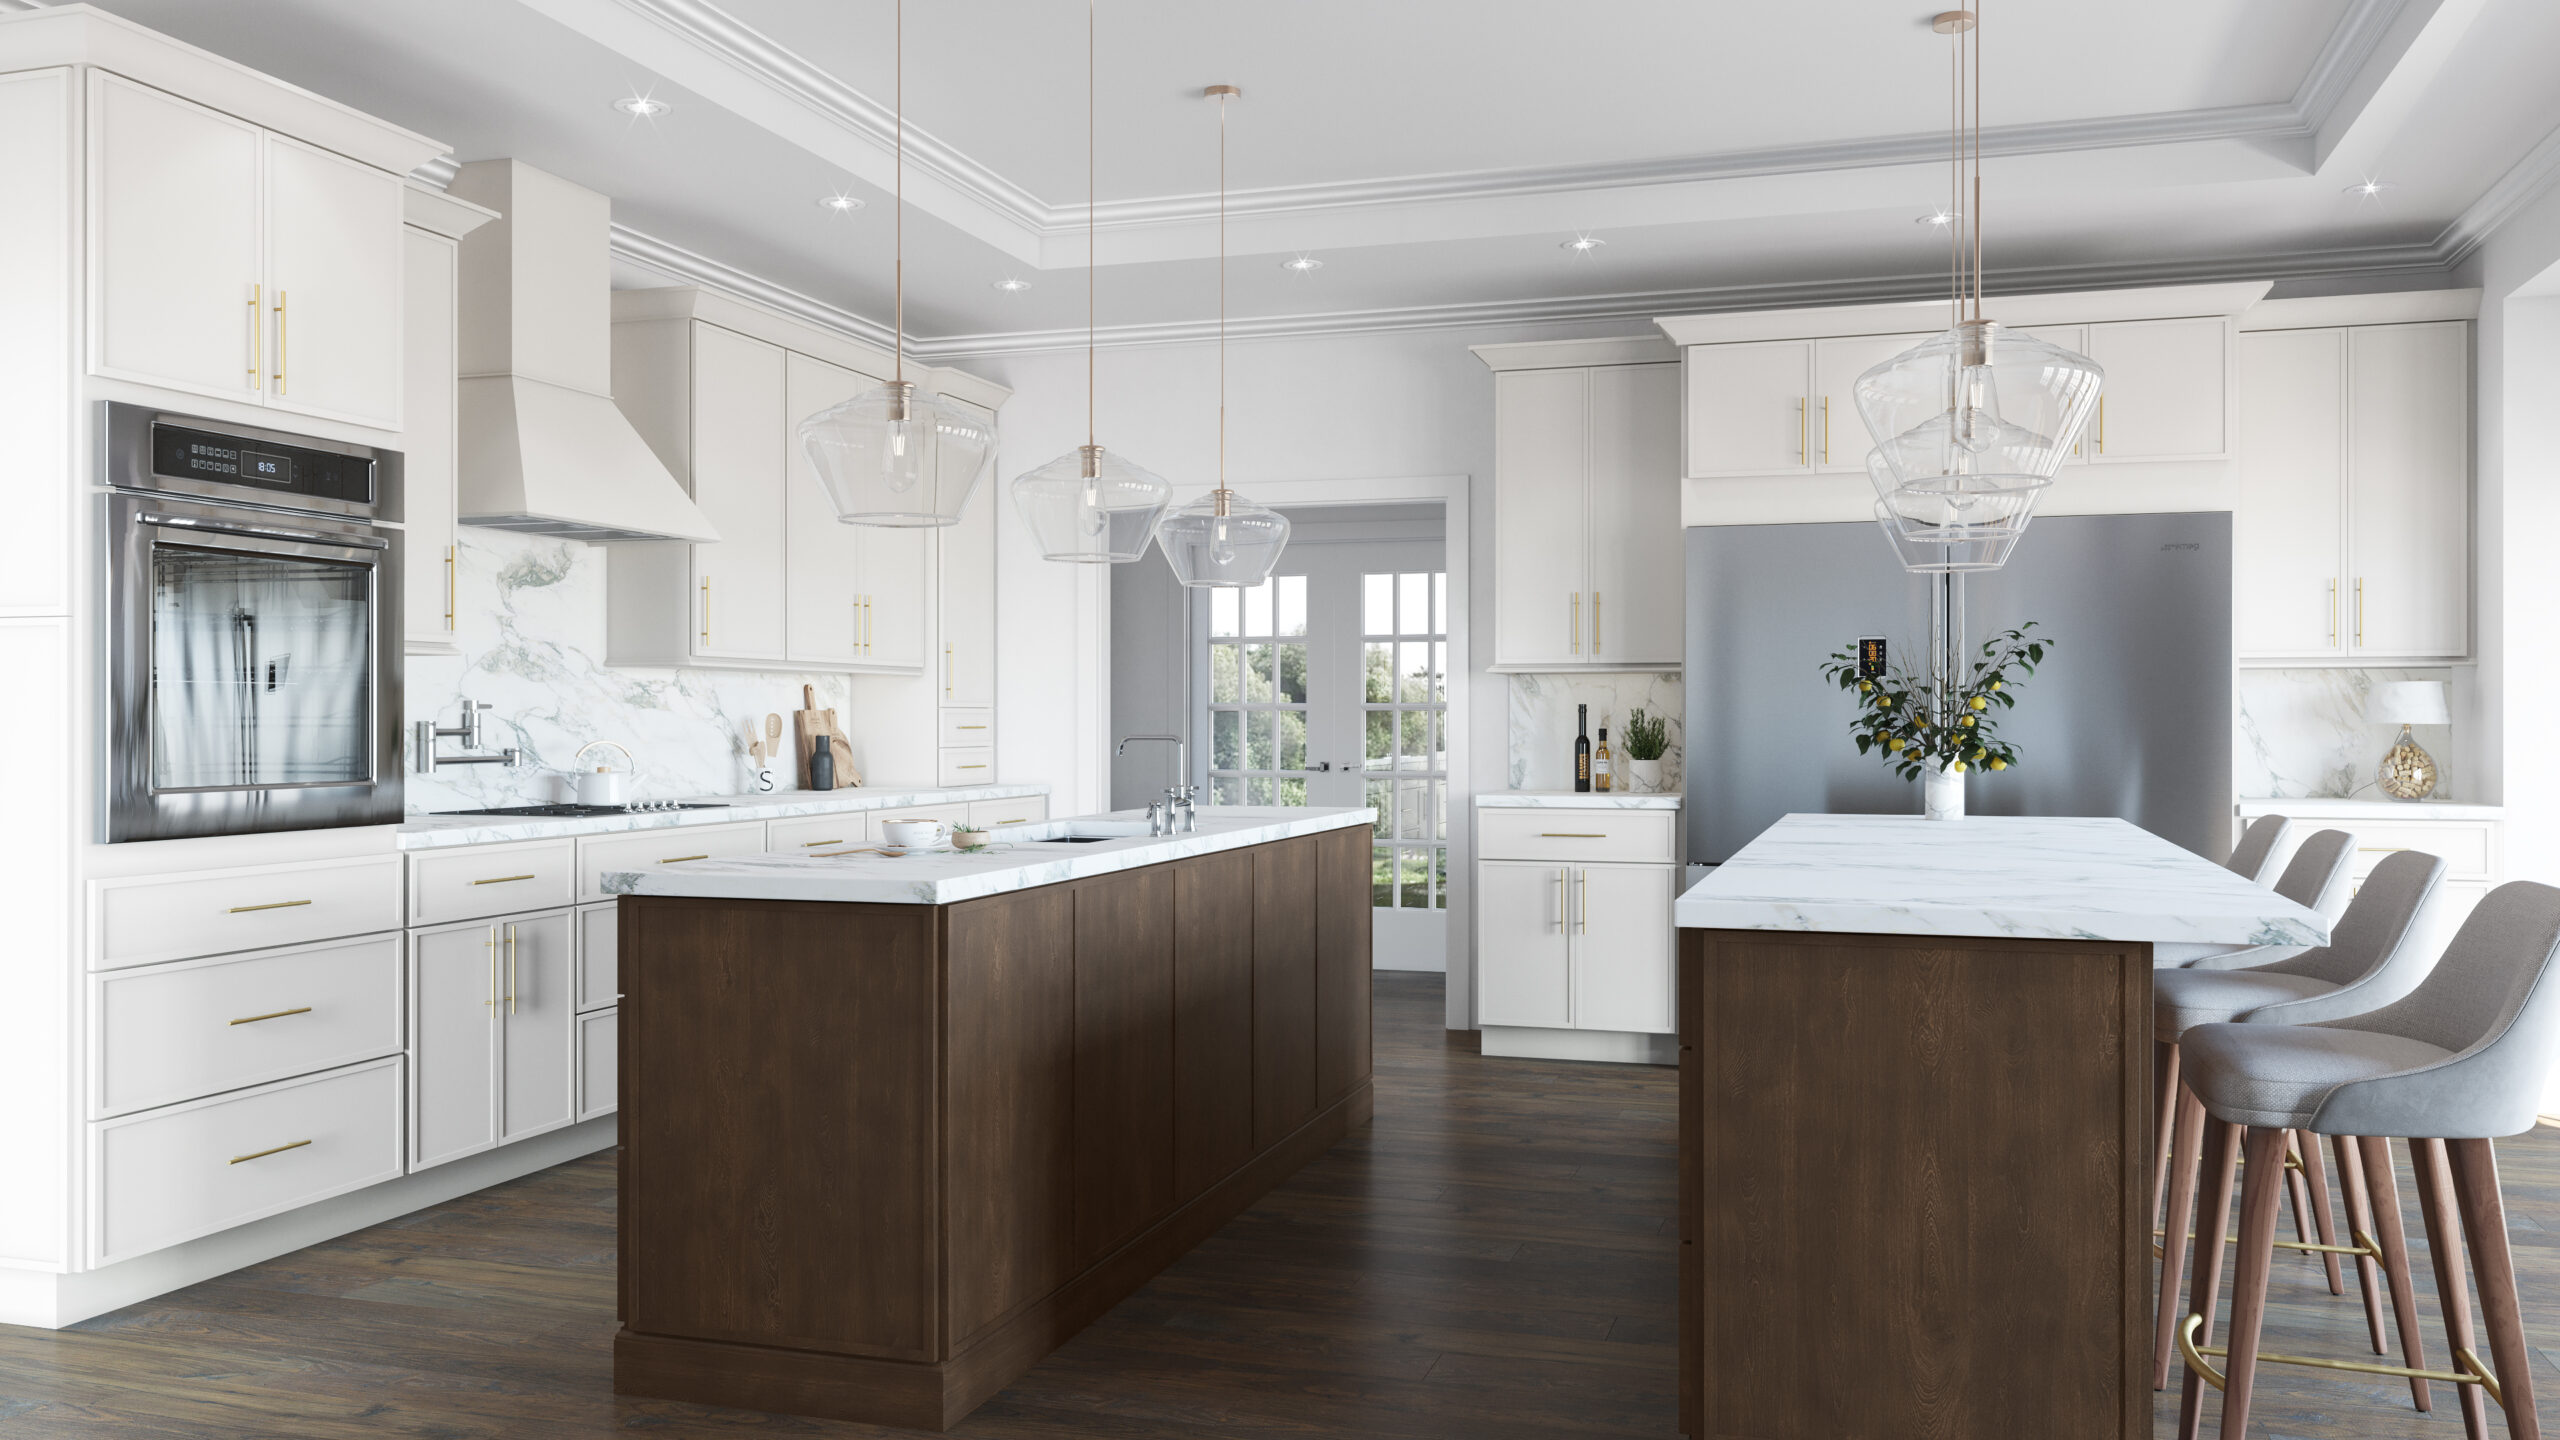 Allure Luna Featured Two Tone Wood Kitchen Cabinets